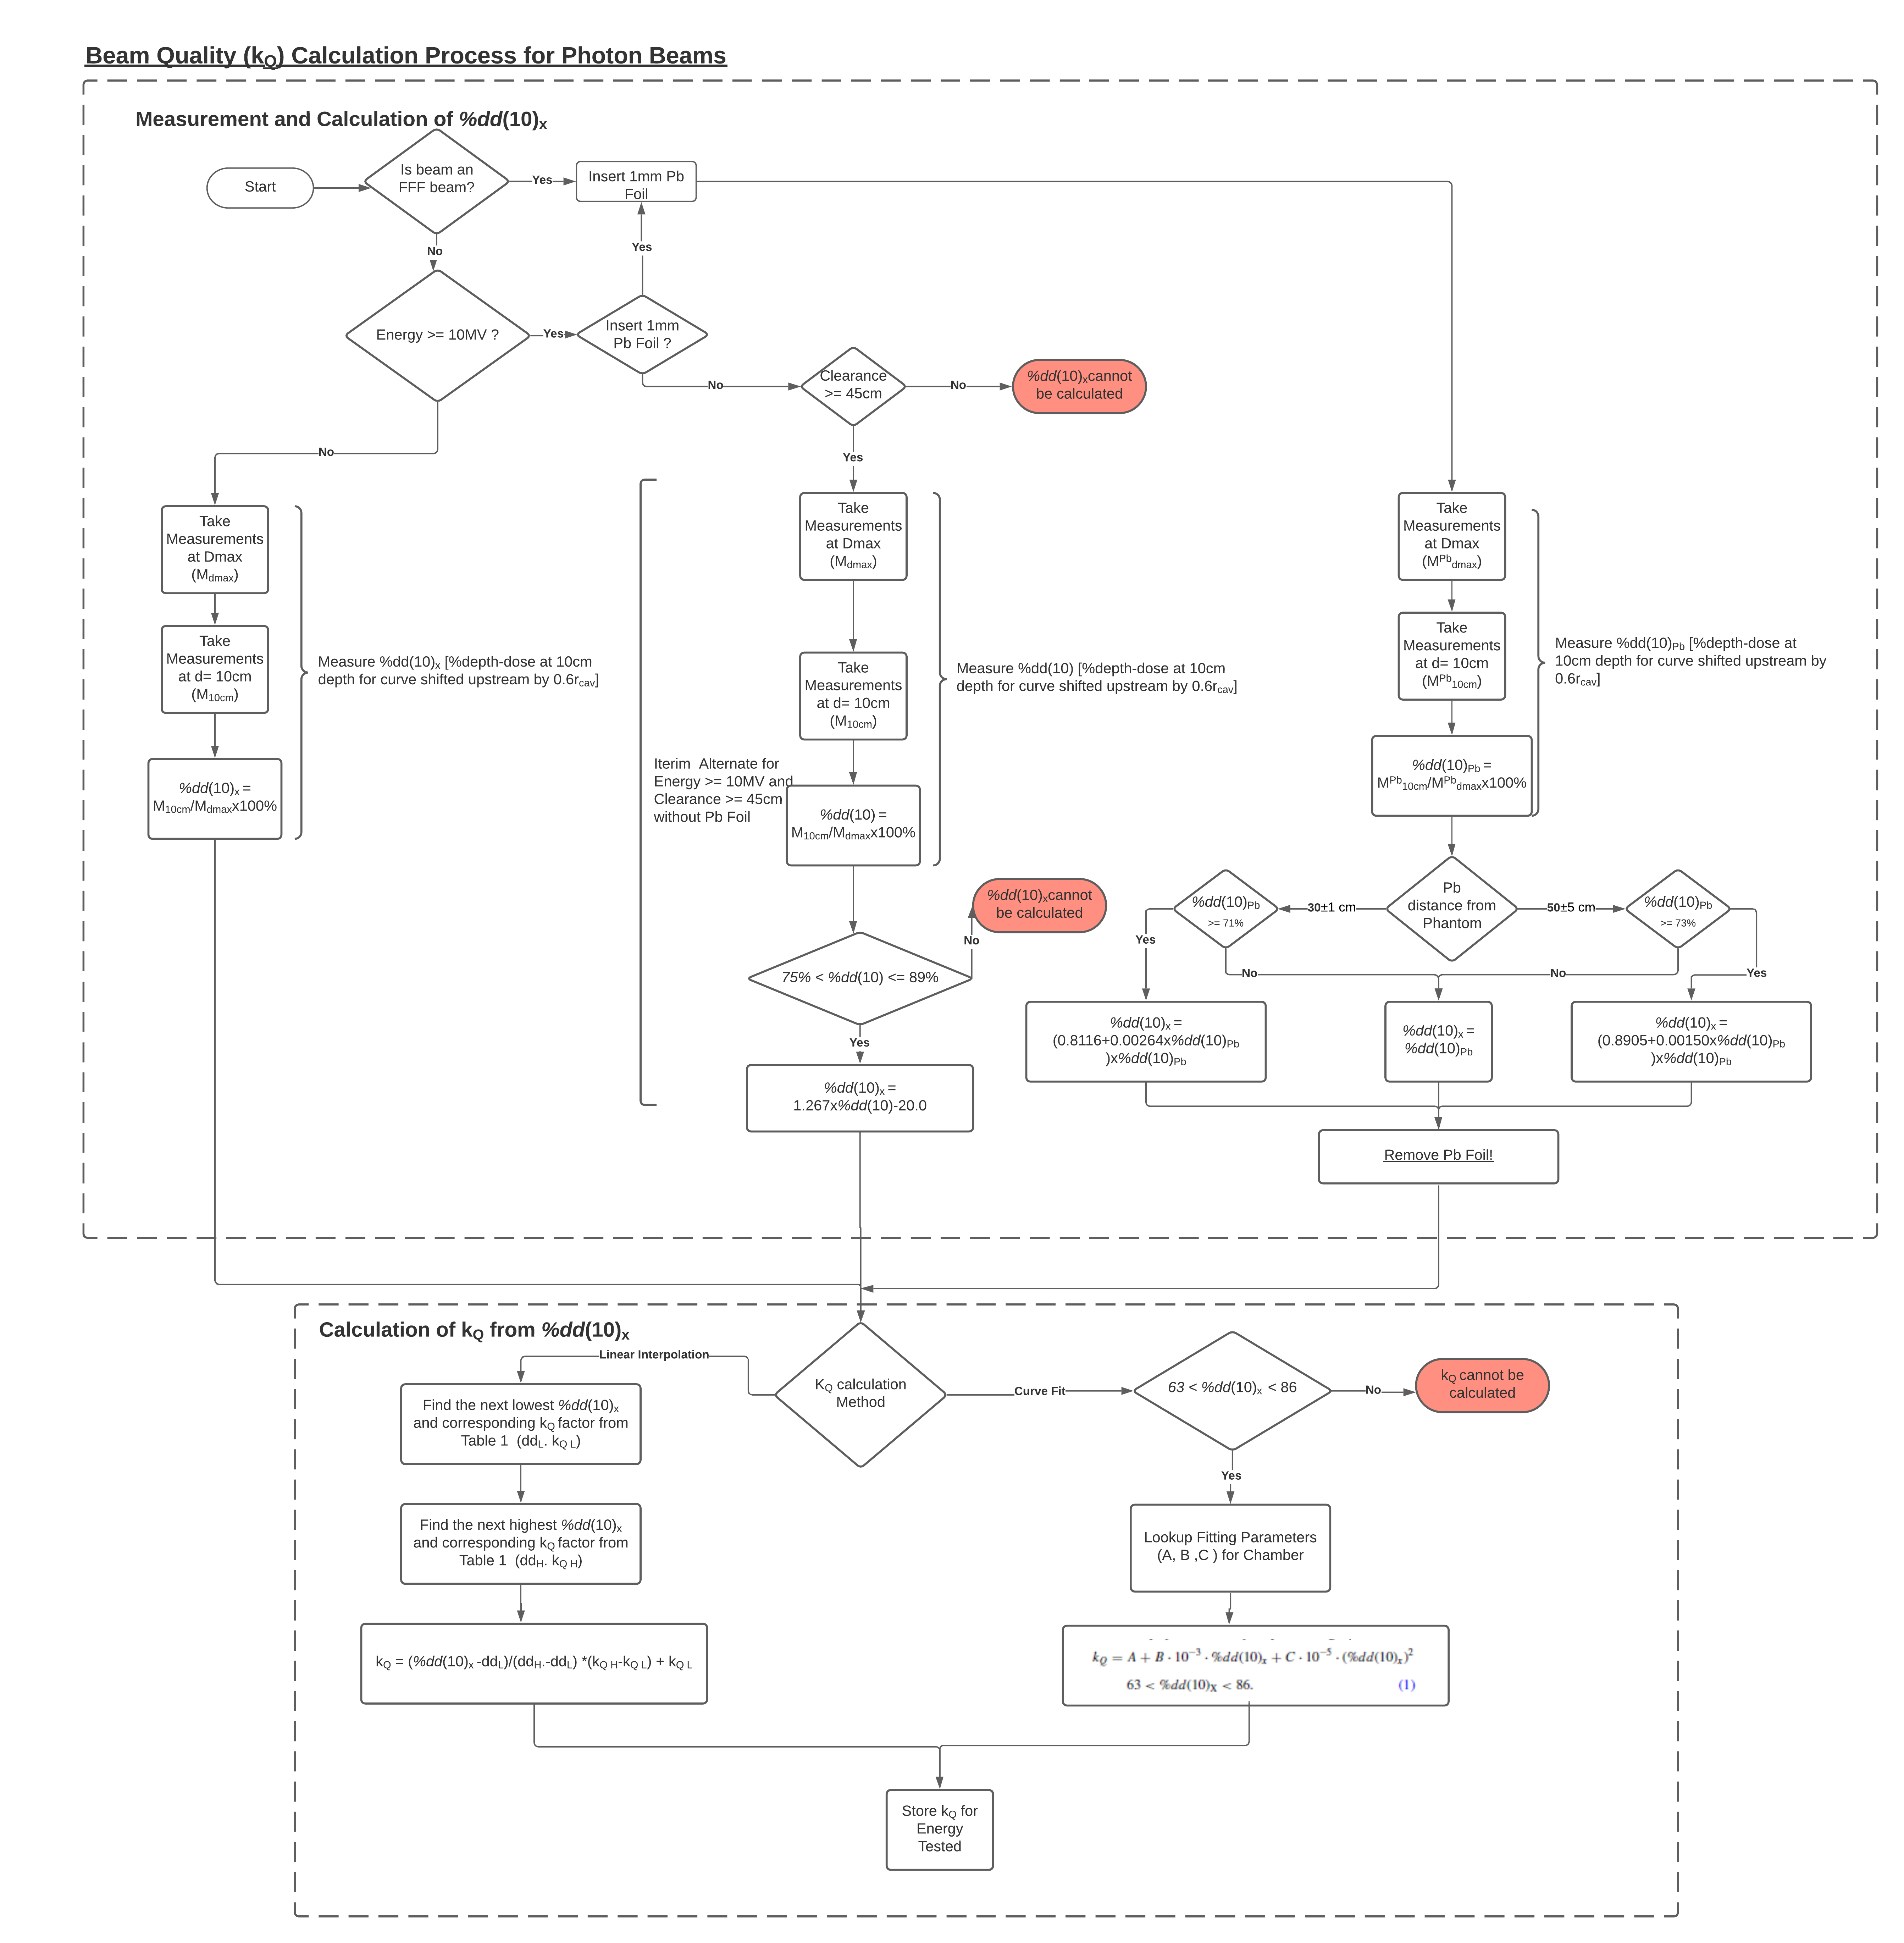 kQ_Calculations_for_Photon_Beams_-_kQ_calculation_Flowchart__3_.png